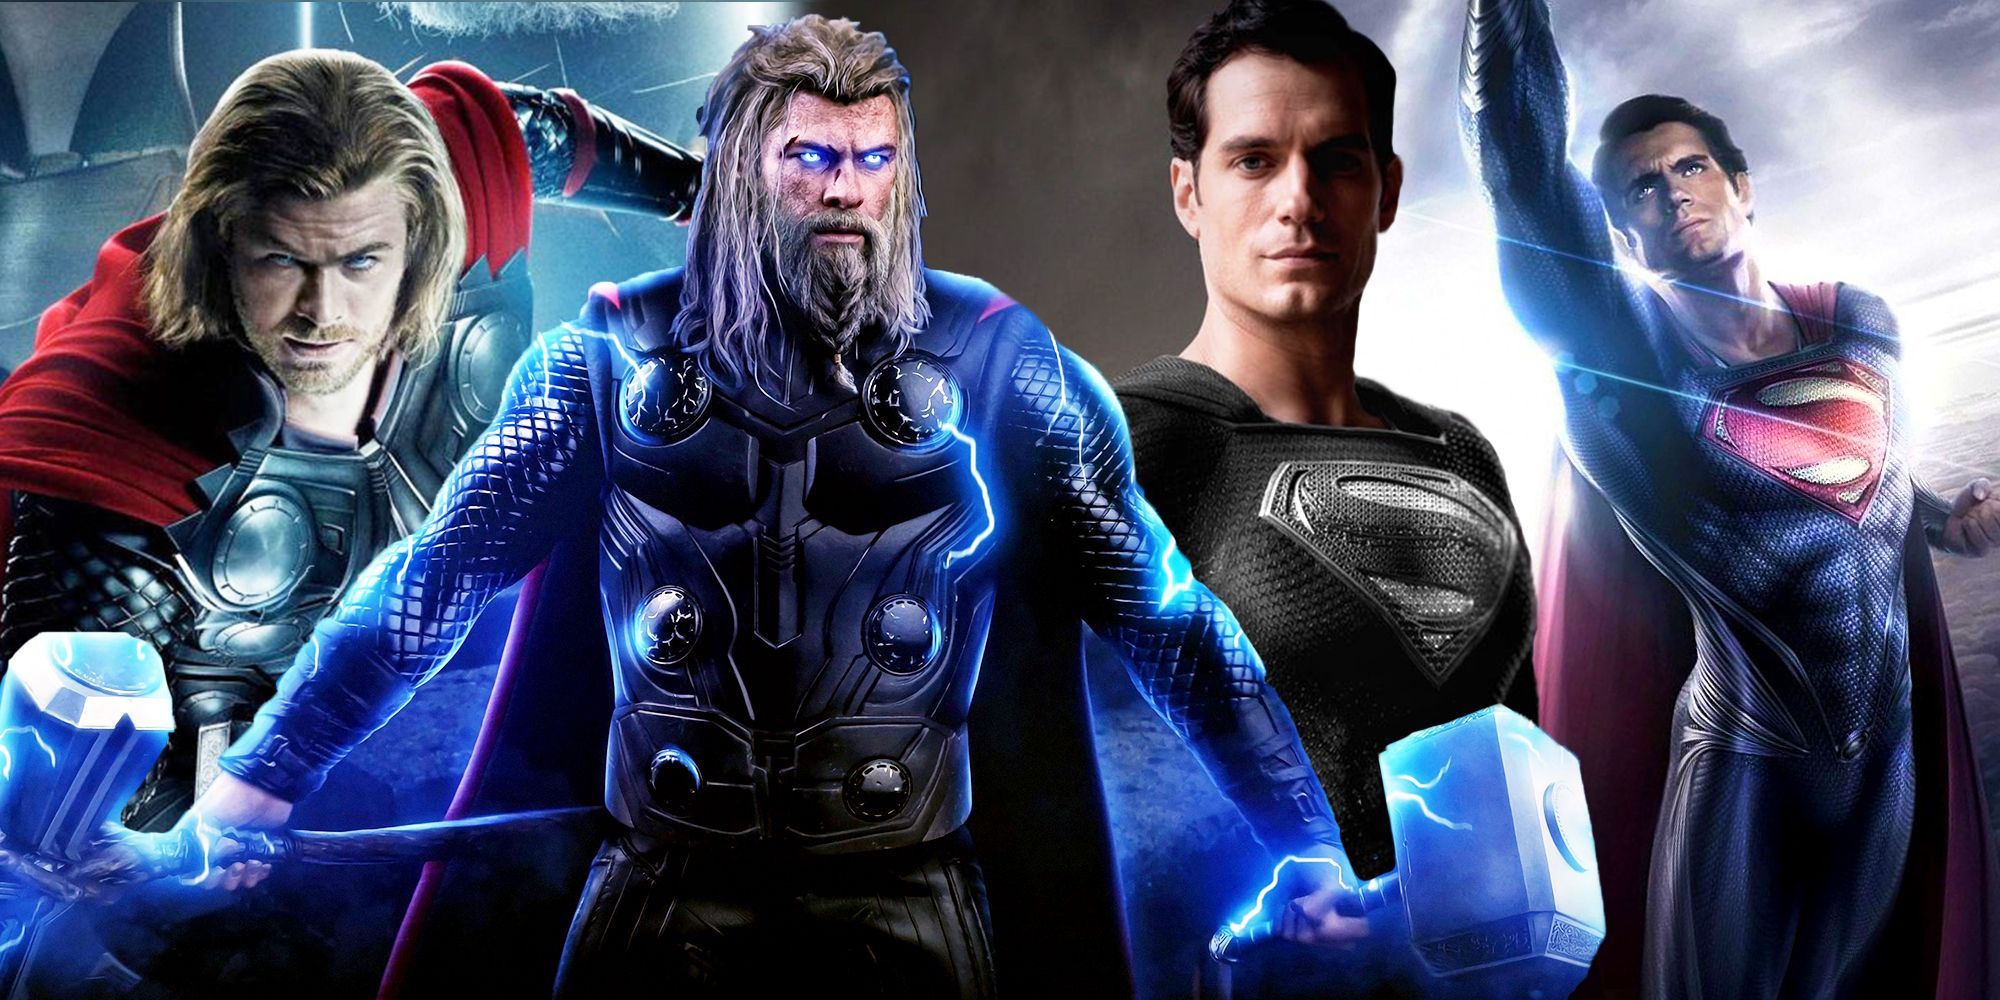 Thor's Transformation in the MCU and Superman's Transformation in the DCEU